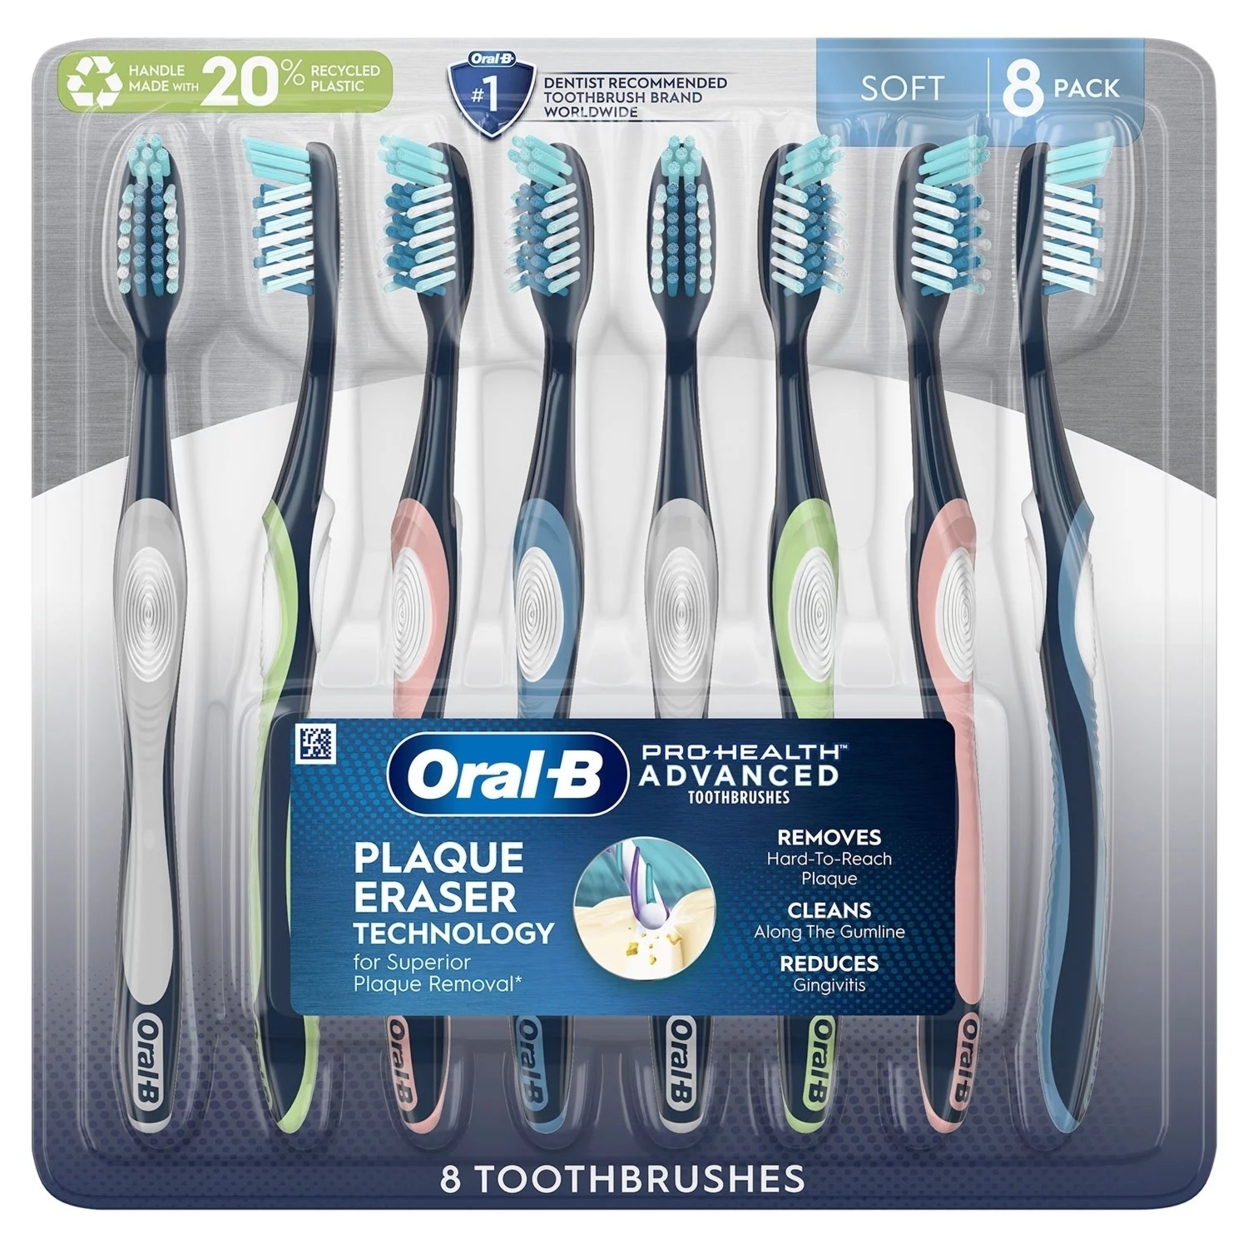 Oral-B ProHealth Advanced Manual Toothbrush, 8 Count (Soft)